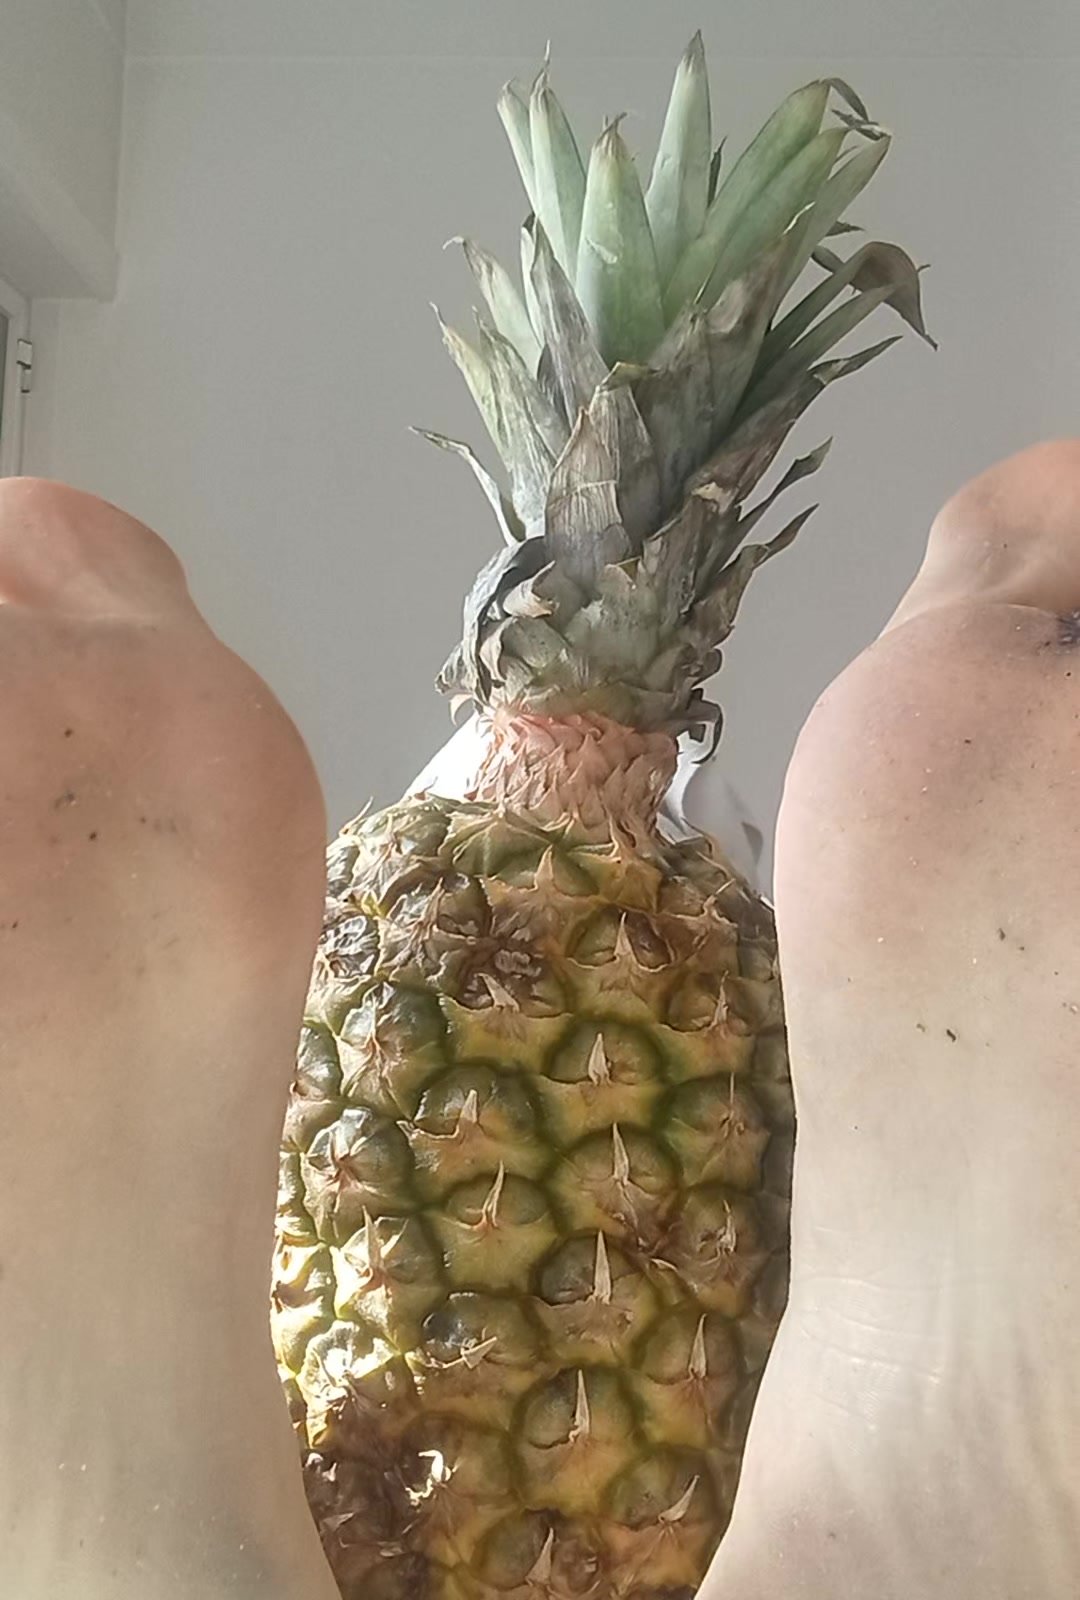 My awesome feet playing with pineapple